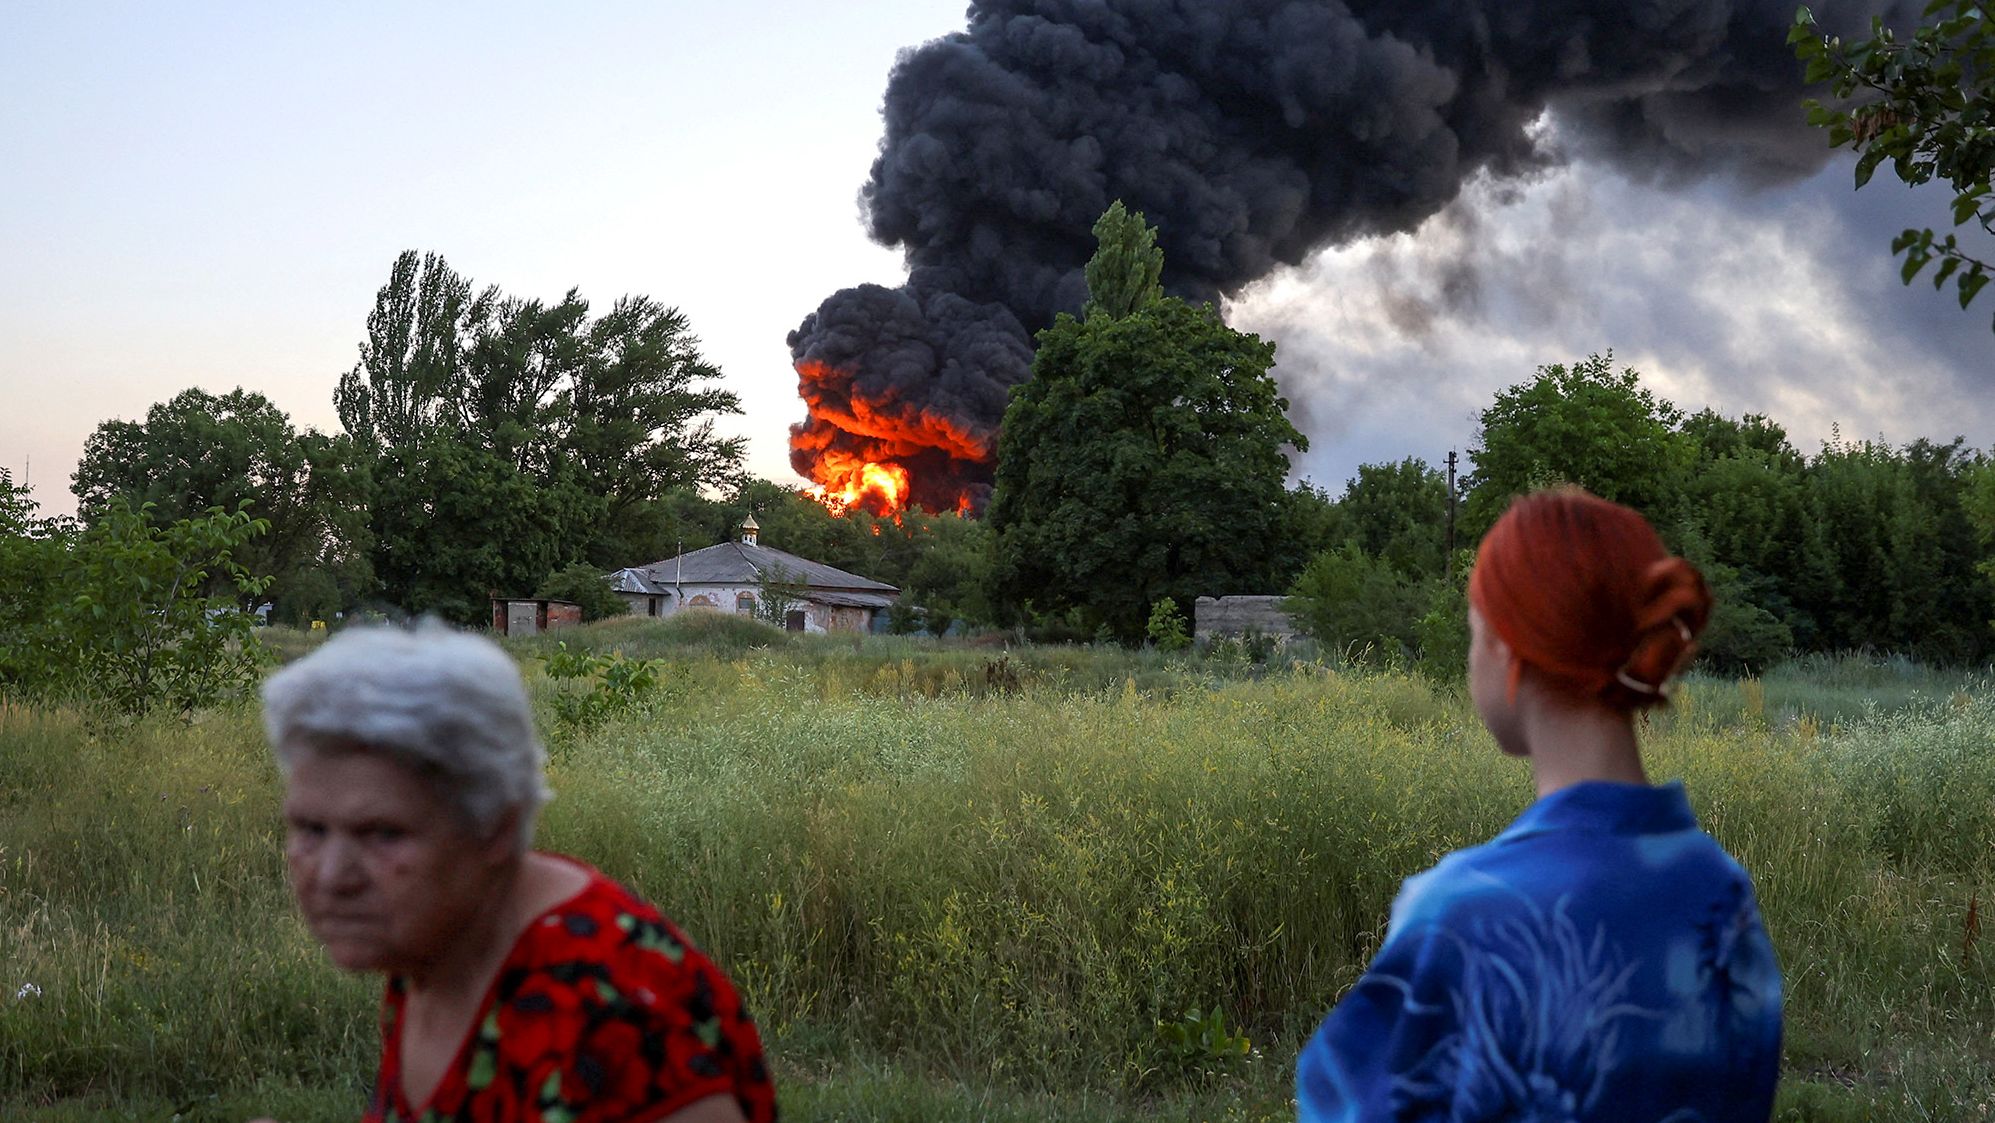 Local residents look on as smoke rises after shelling in Donetsk, Ukraine, on July 7.